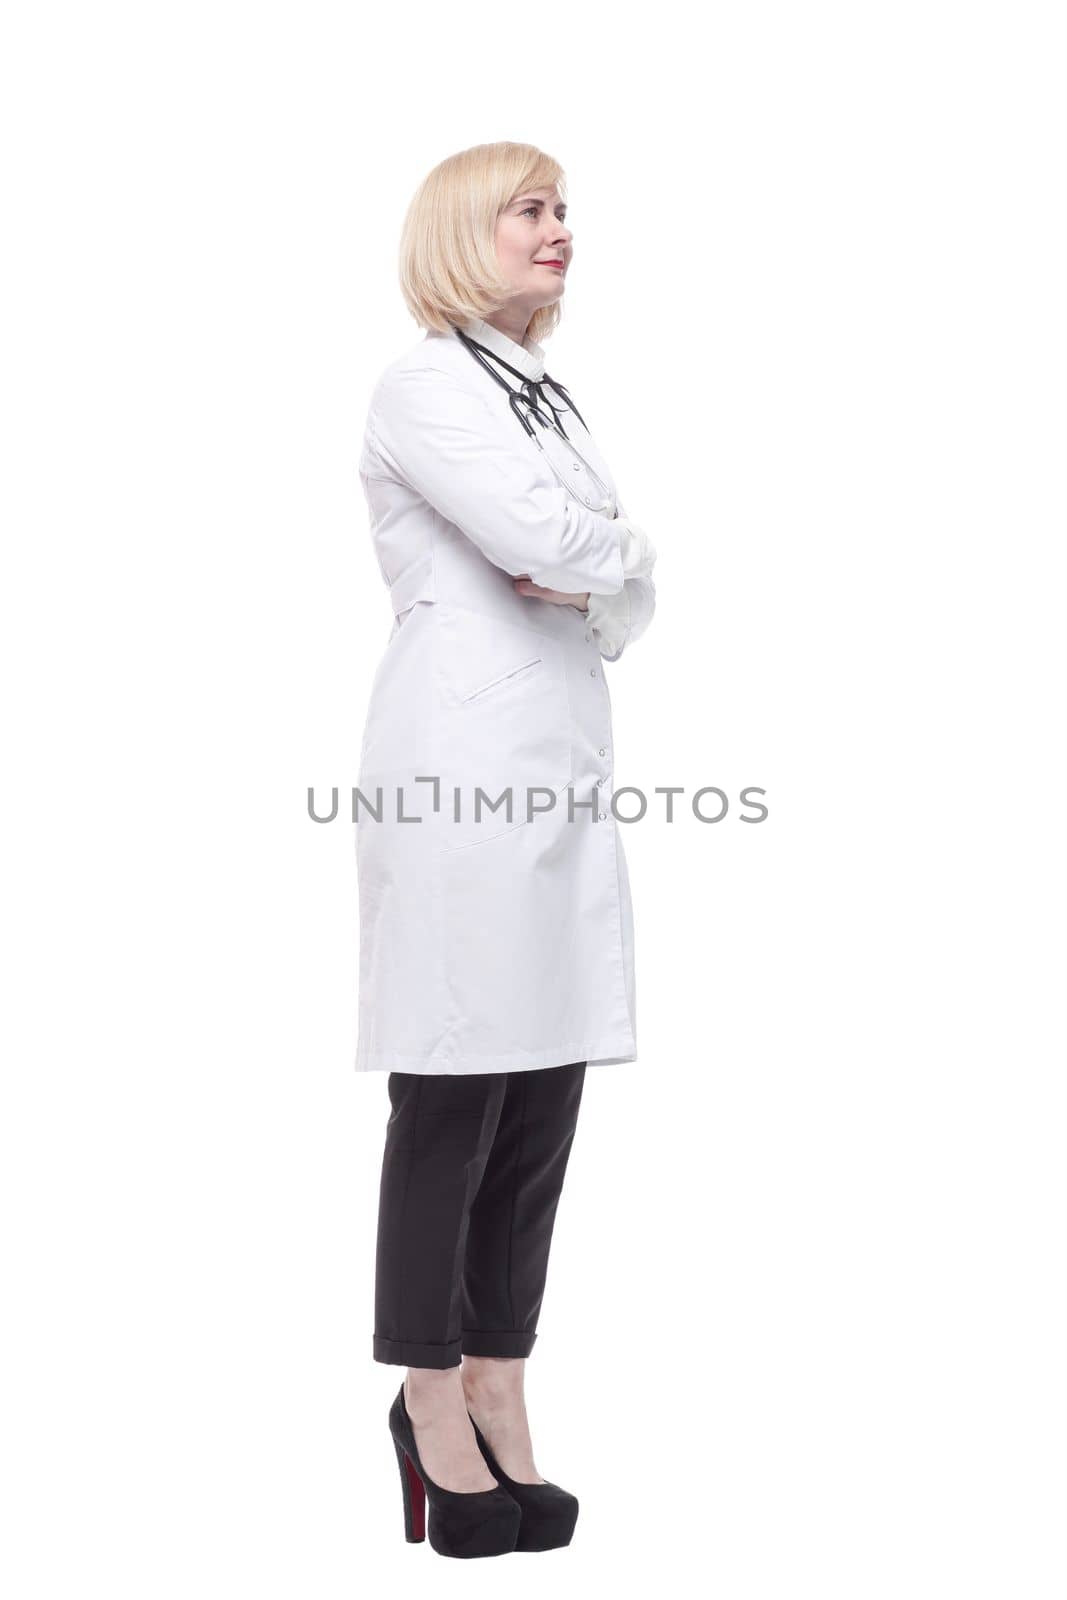 qualified female doctor . isolated on a white background. by asdf